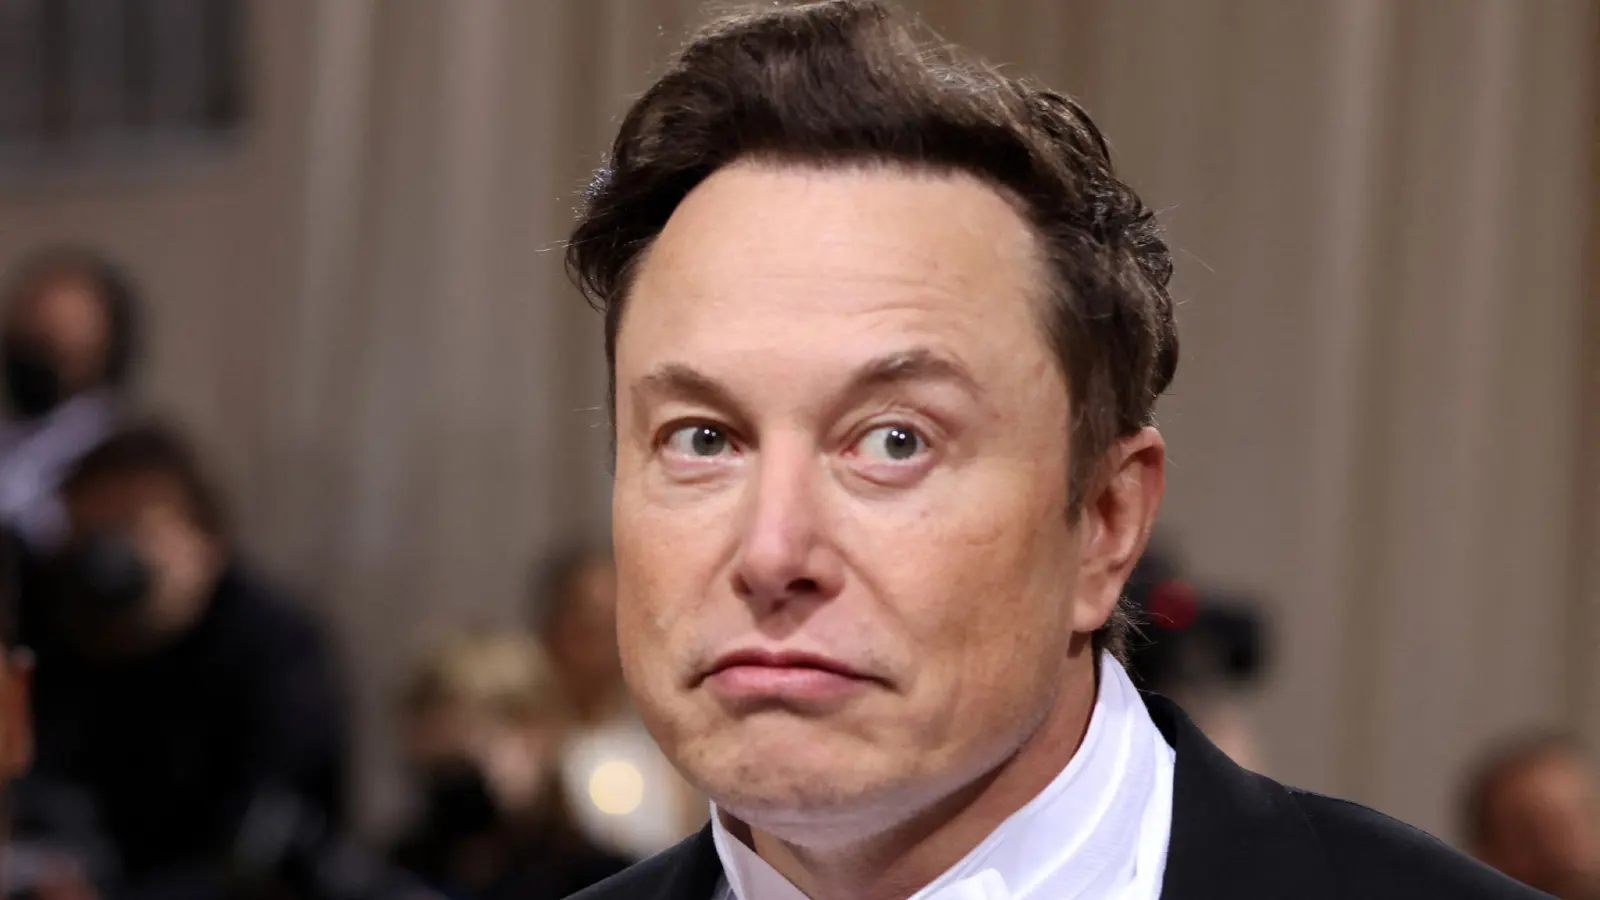 Elon Musk gets booed by a crowd at a Dave Chappelle comedy show.